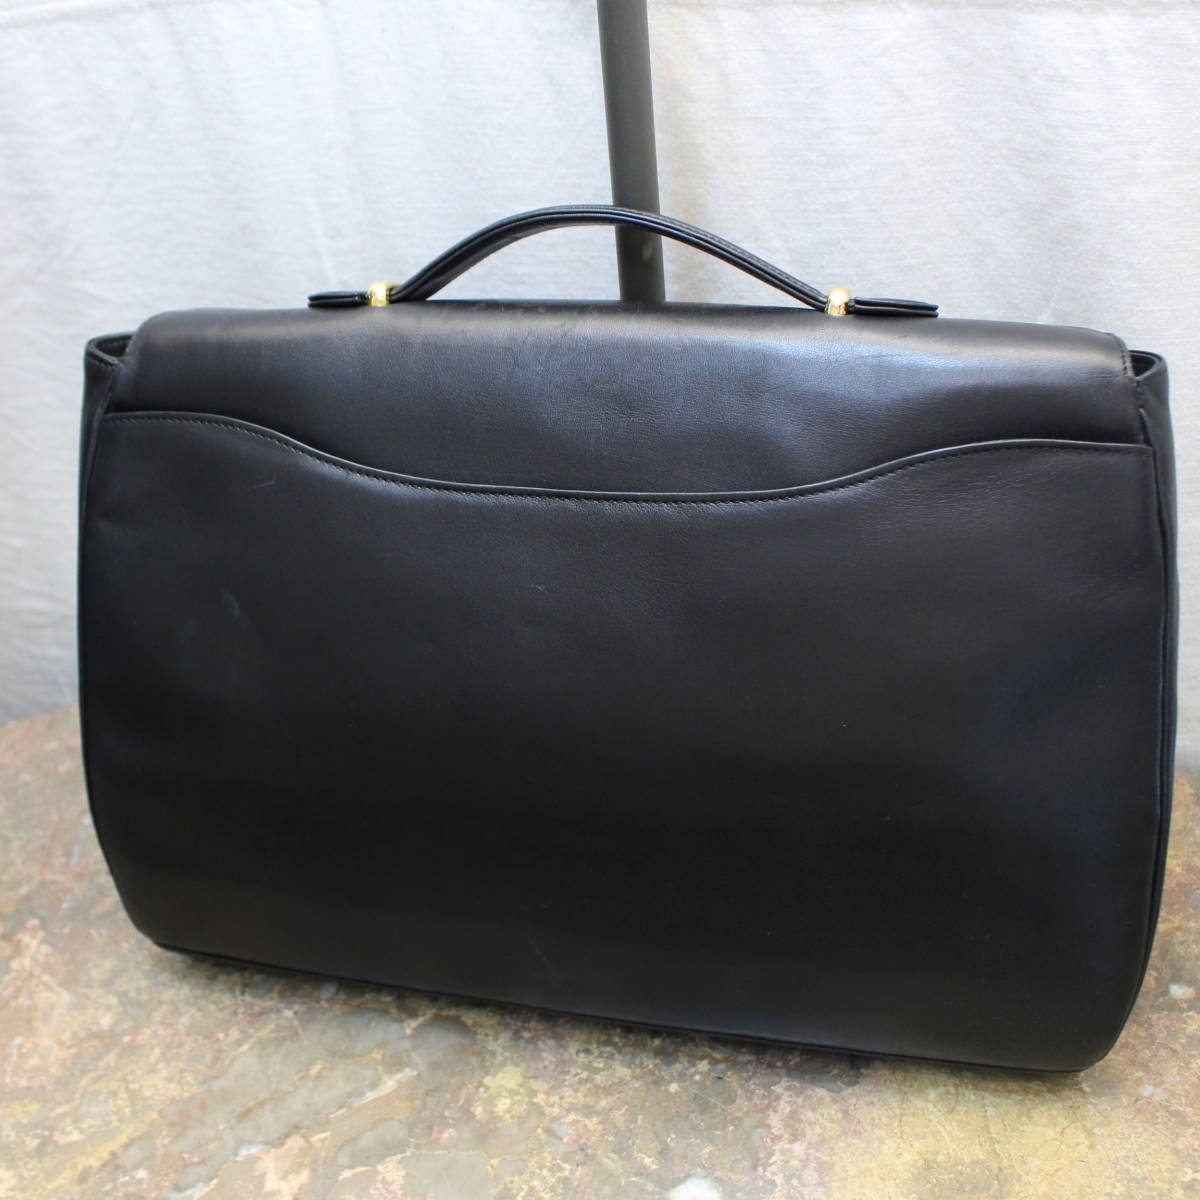 OLD Cartier LEATHER HAND BAG BUSINESS BAG MADE IN FRANCE/オールドカルティエレザーハンドバッグ(ビジネスバッグ)_画像4